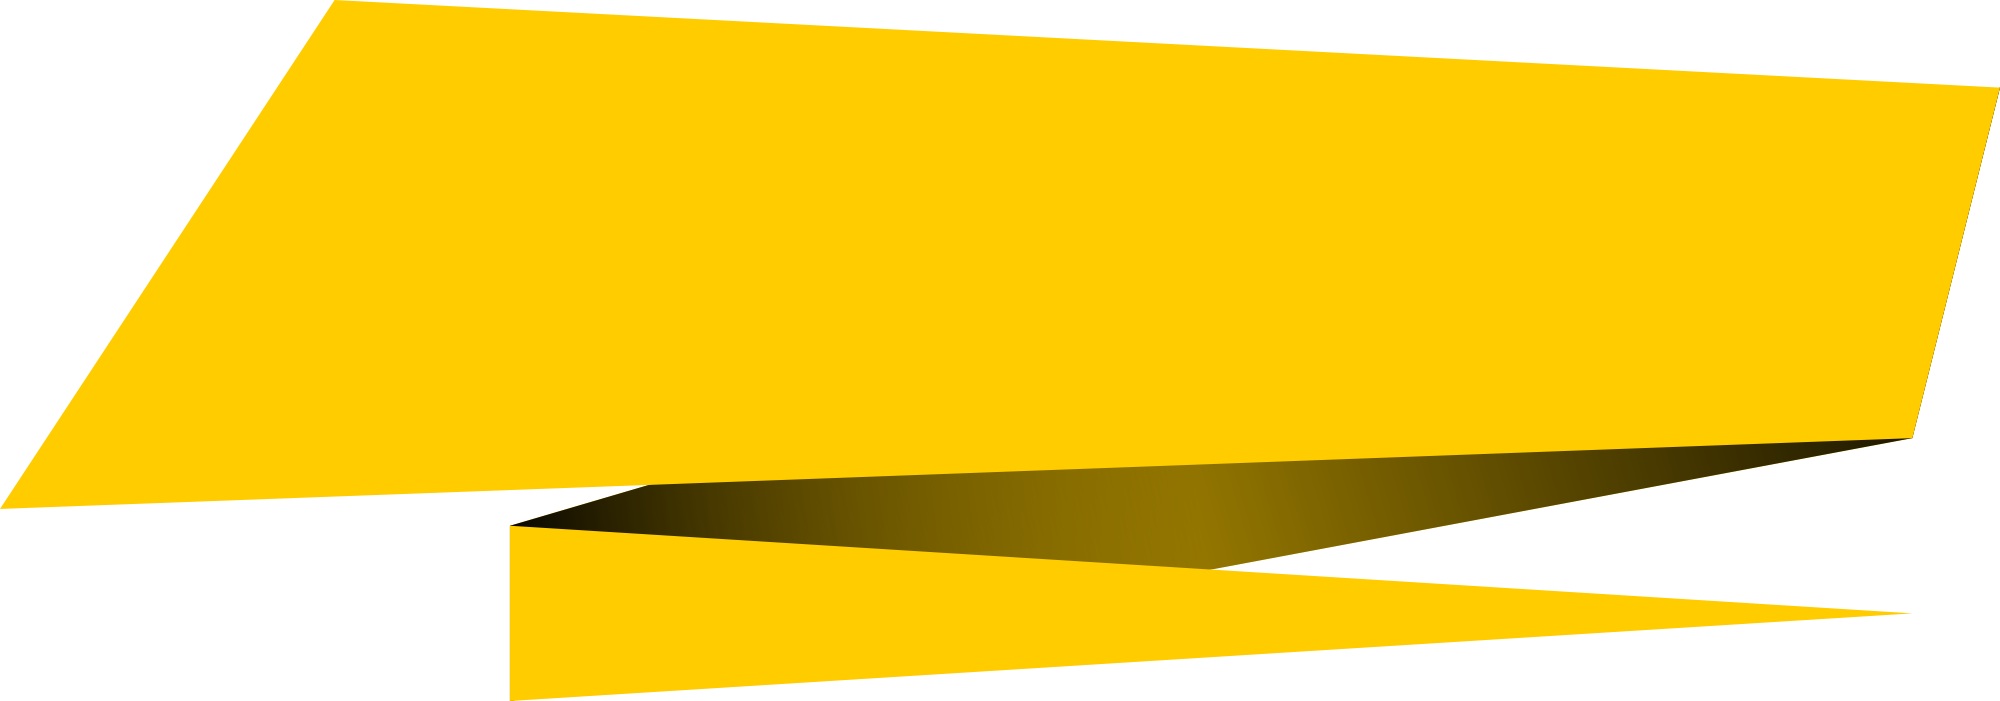 Yellow Banner PNG Background Image